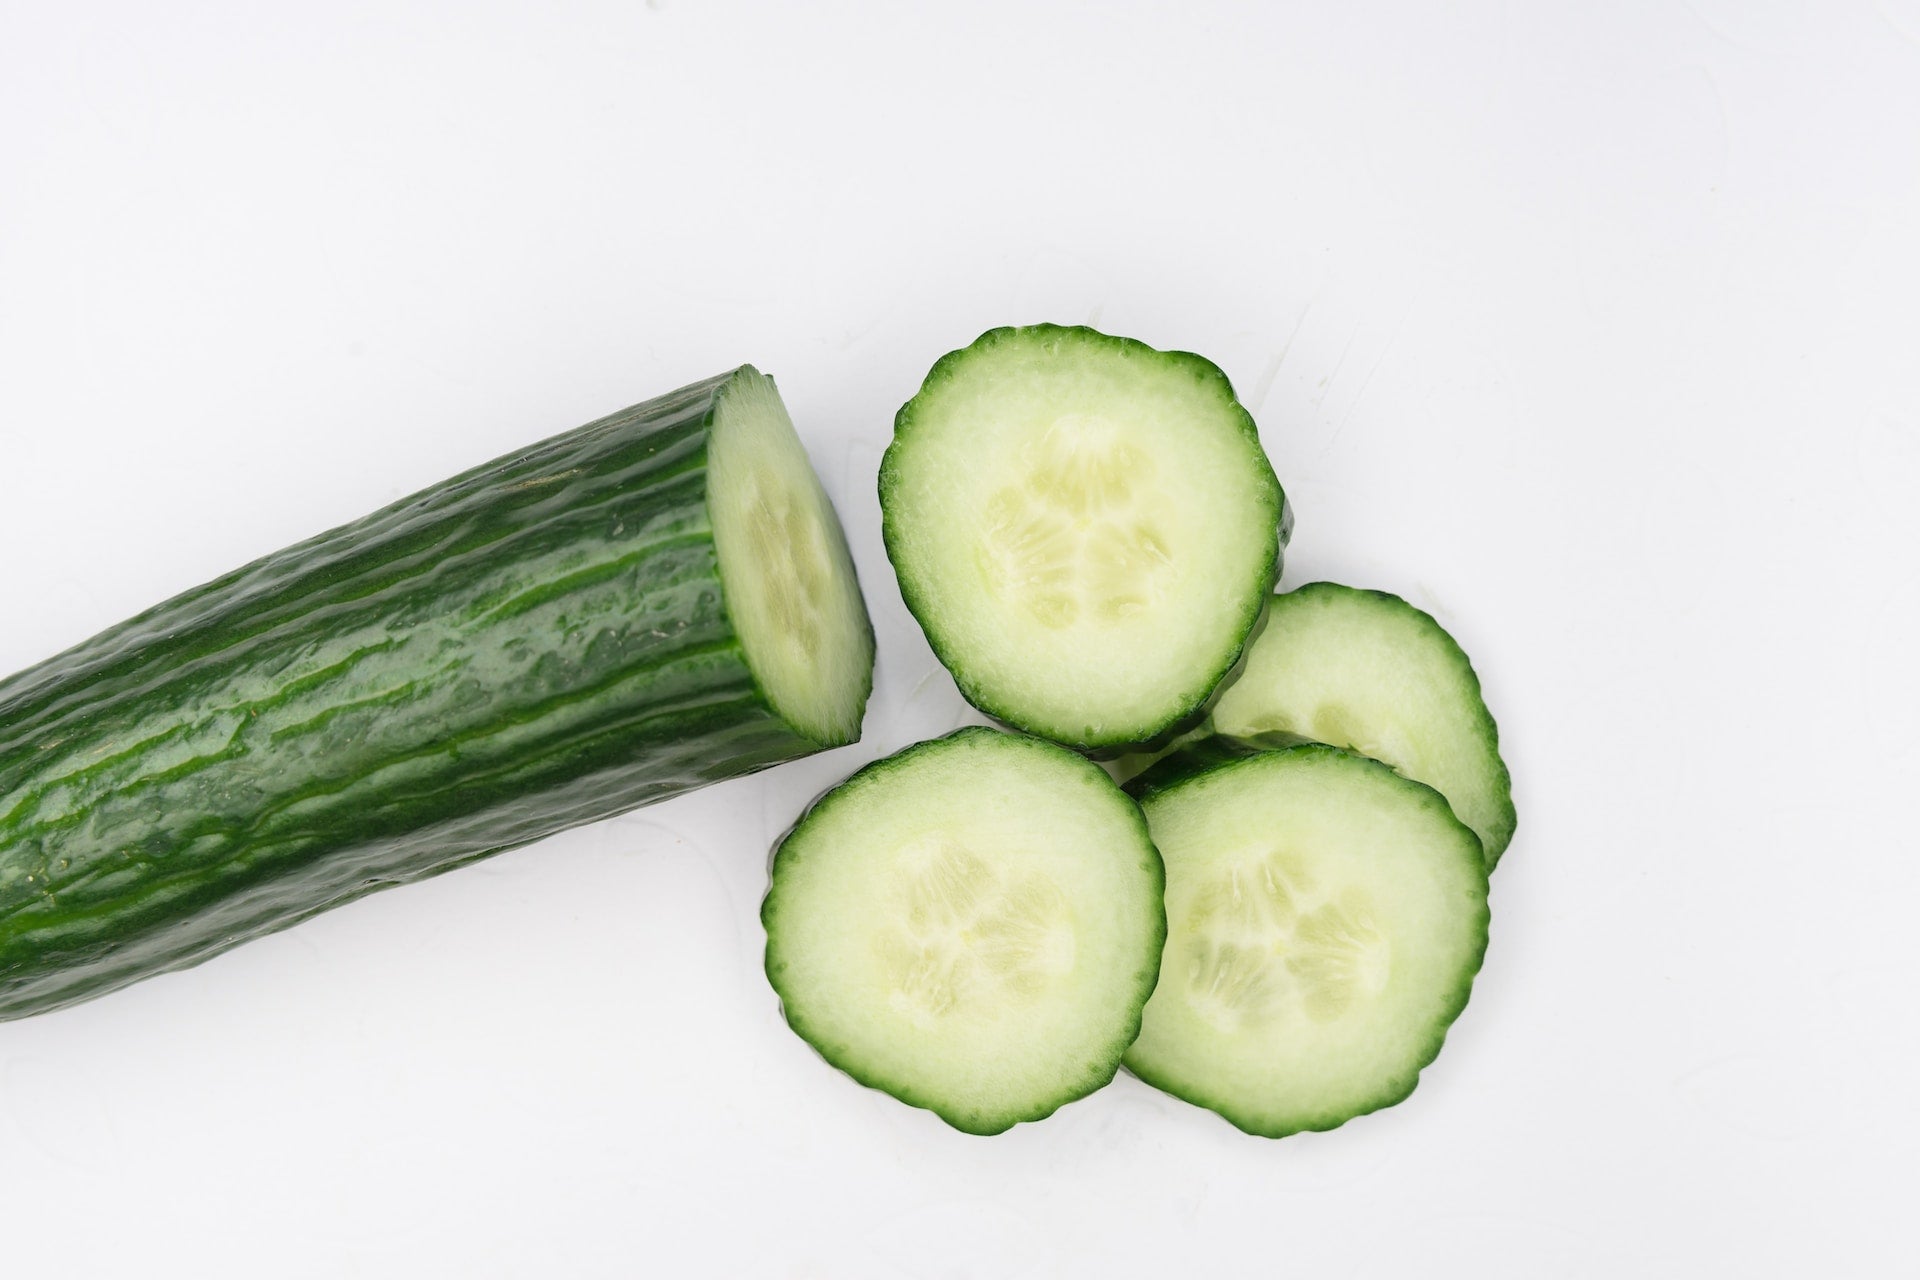 On display is a single cucumber, of the variety Muncher. These particular cucumbers have the familiar smoothness one associates with typical cucumbers. The cucumber appears to have been sliced up to the midway point, with the slices stacked next to it. The cucumber and slices rest on a pure white surface.